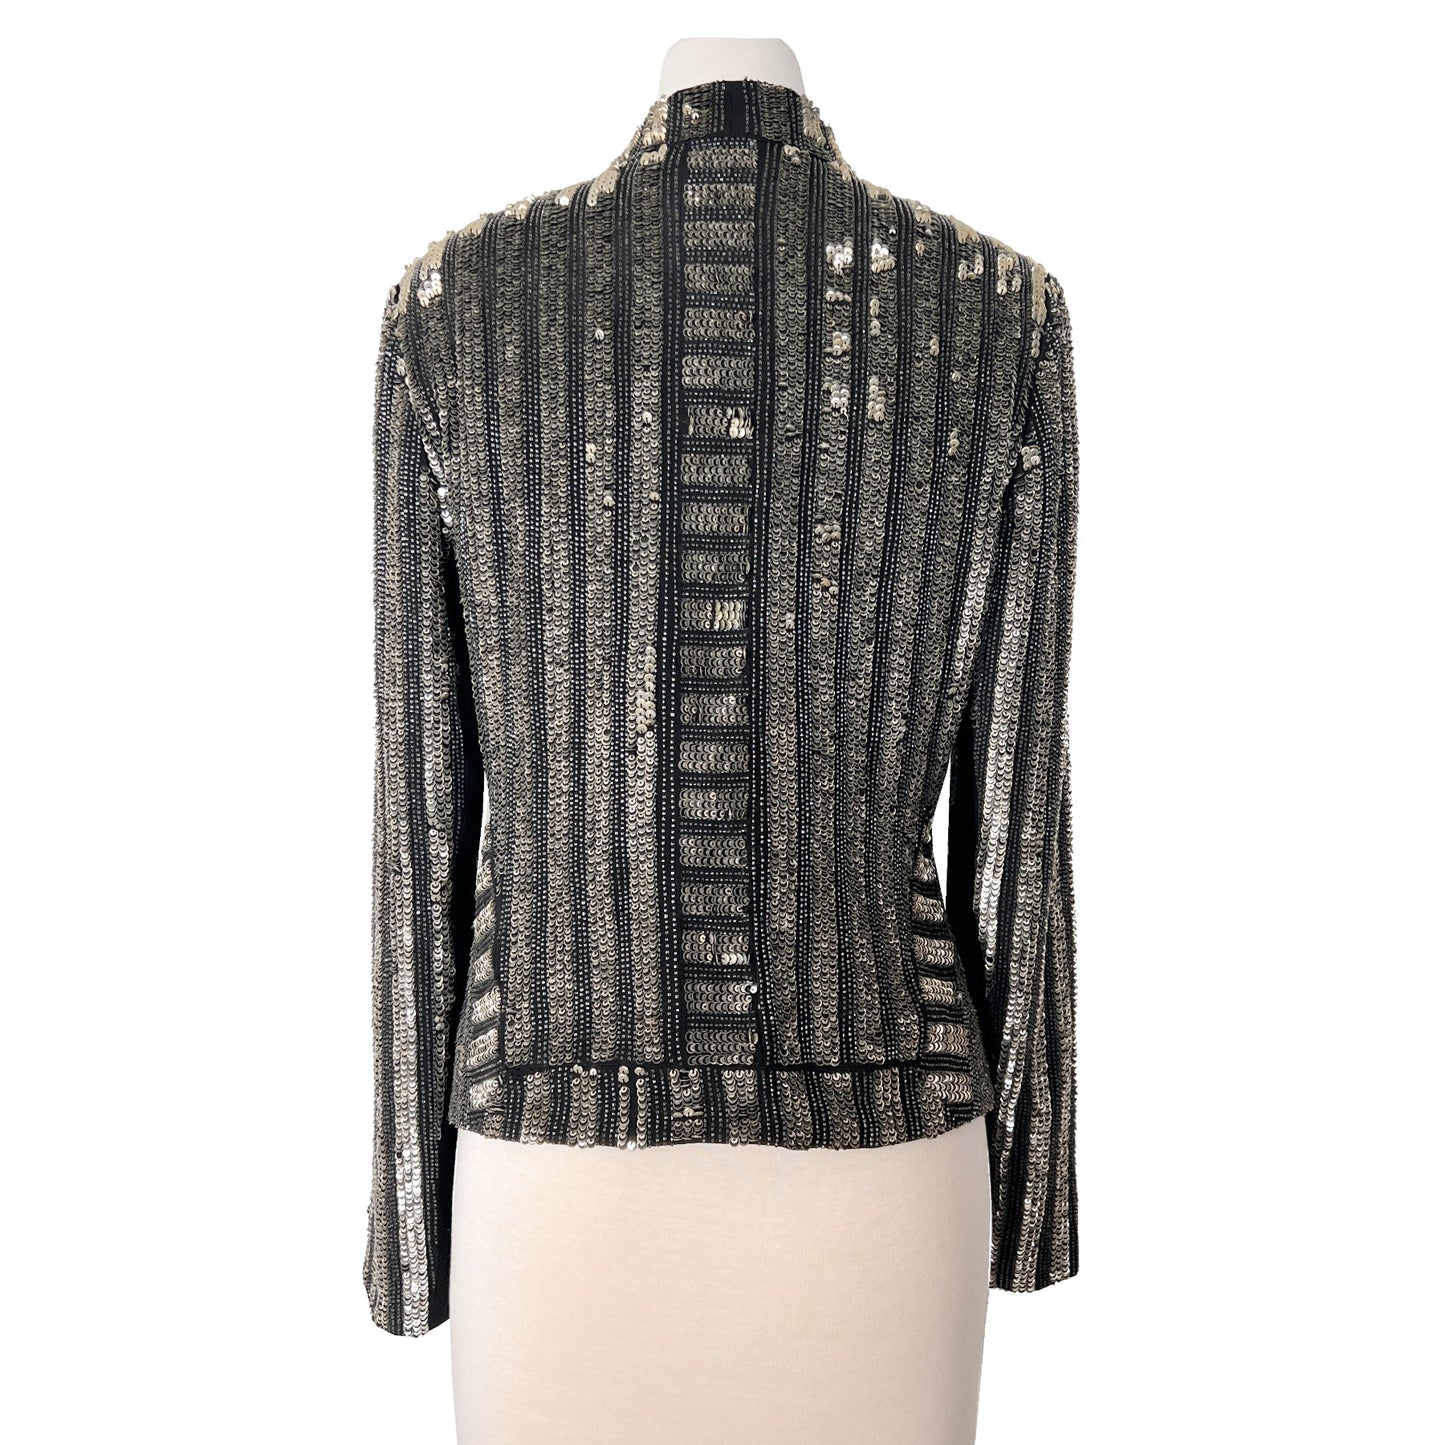 J. Mendel Paris Couture Silver Sequin Cropped Embroidered Jacket Blazer Size US 8